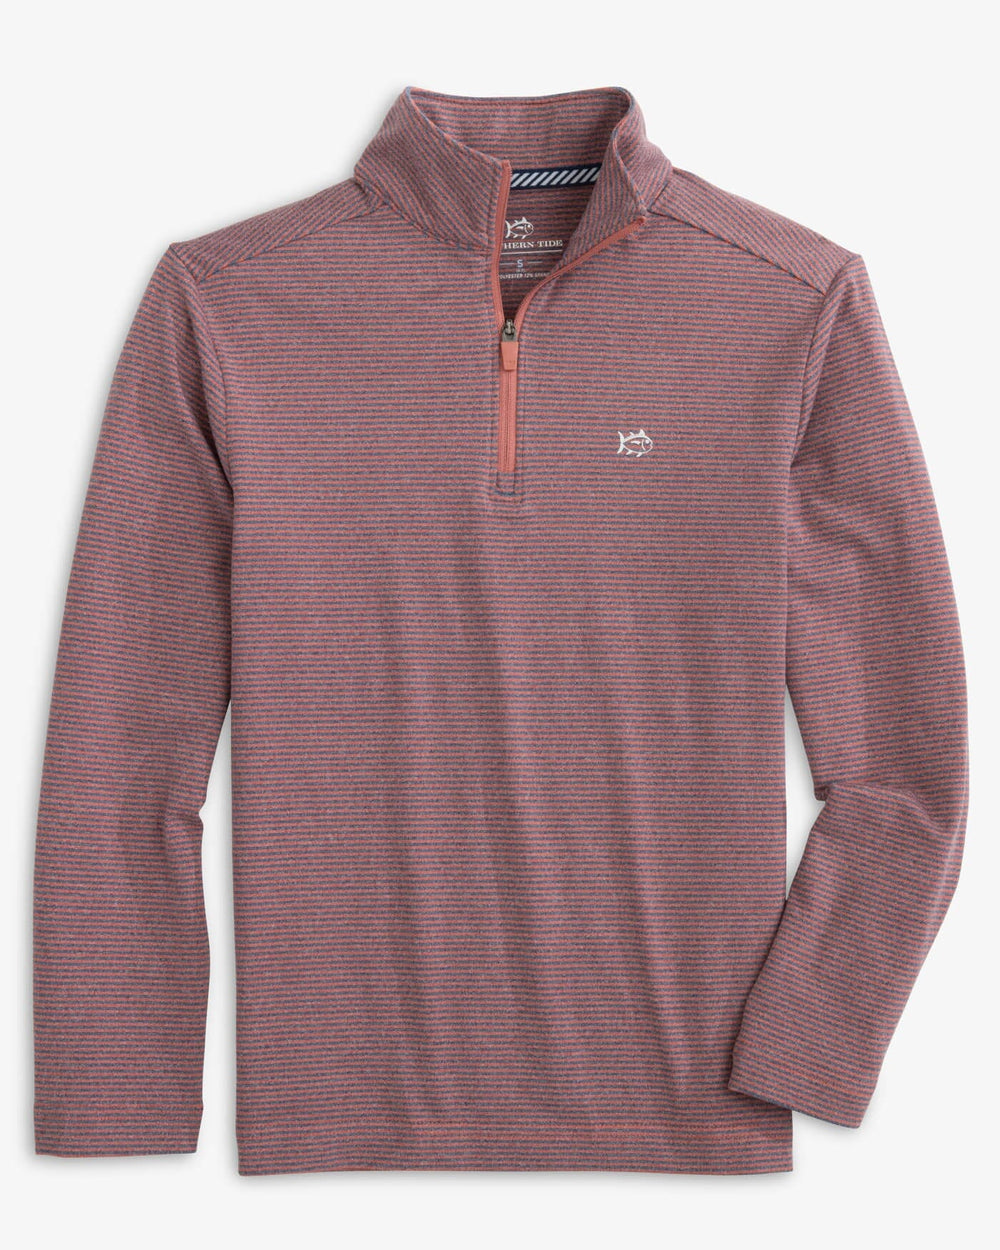 The front view of the Southern Tide Boys Cruiser Heather Micro-Stripe Quarter Zip Pullover by Southern Tide - Heather Dusty Coral